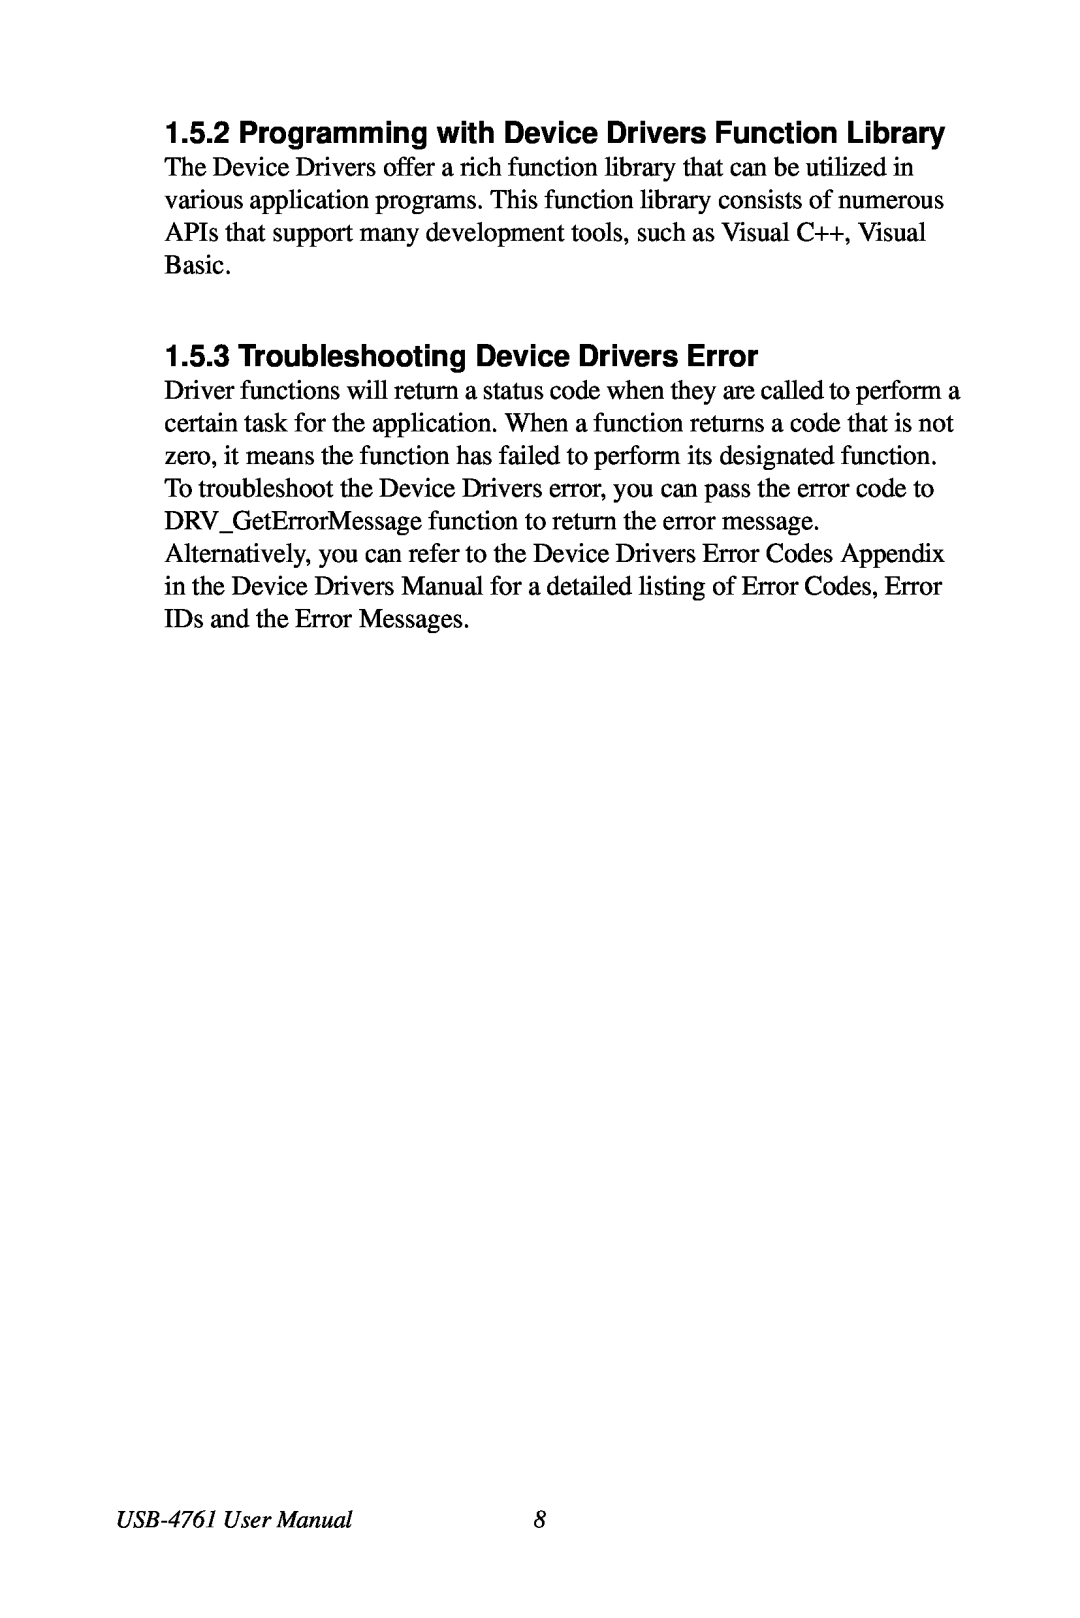 Omega Vehicle Security USB-4761 Programming with Device Drivers Function Library, Troubleshooting Device Drivers Error 